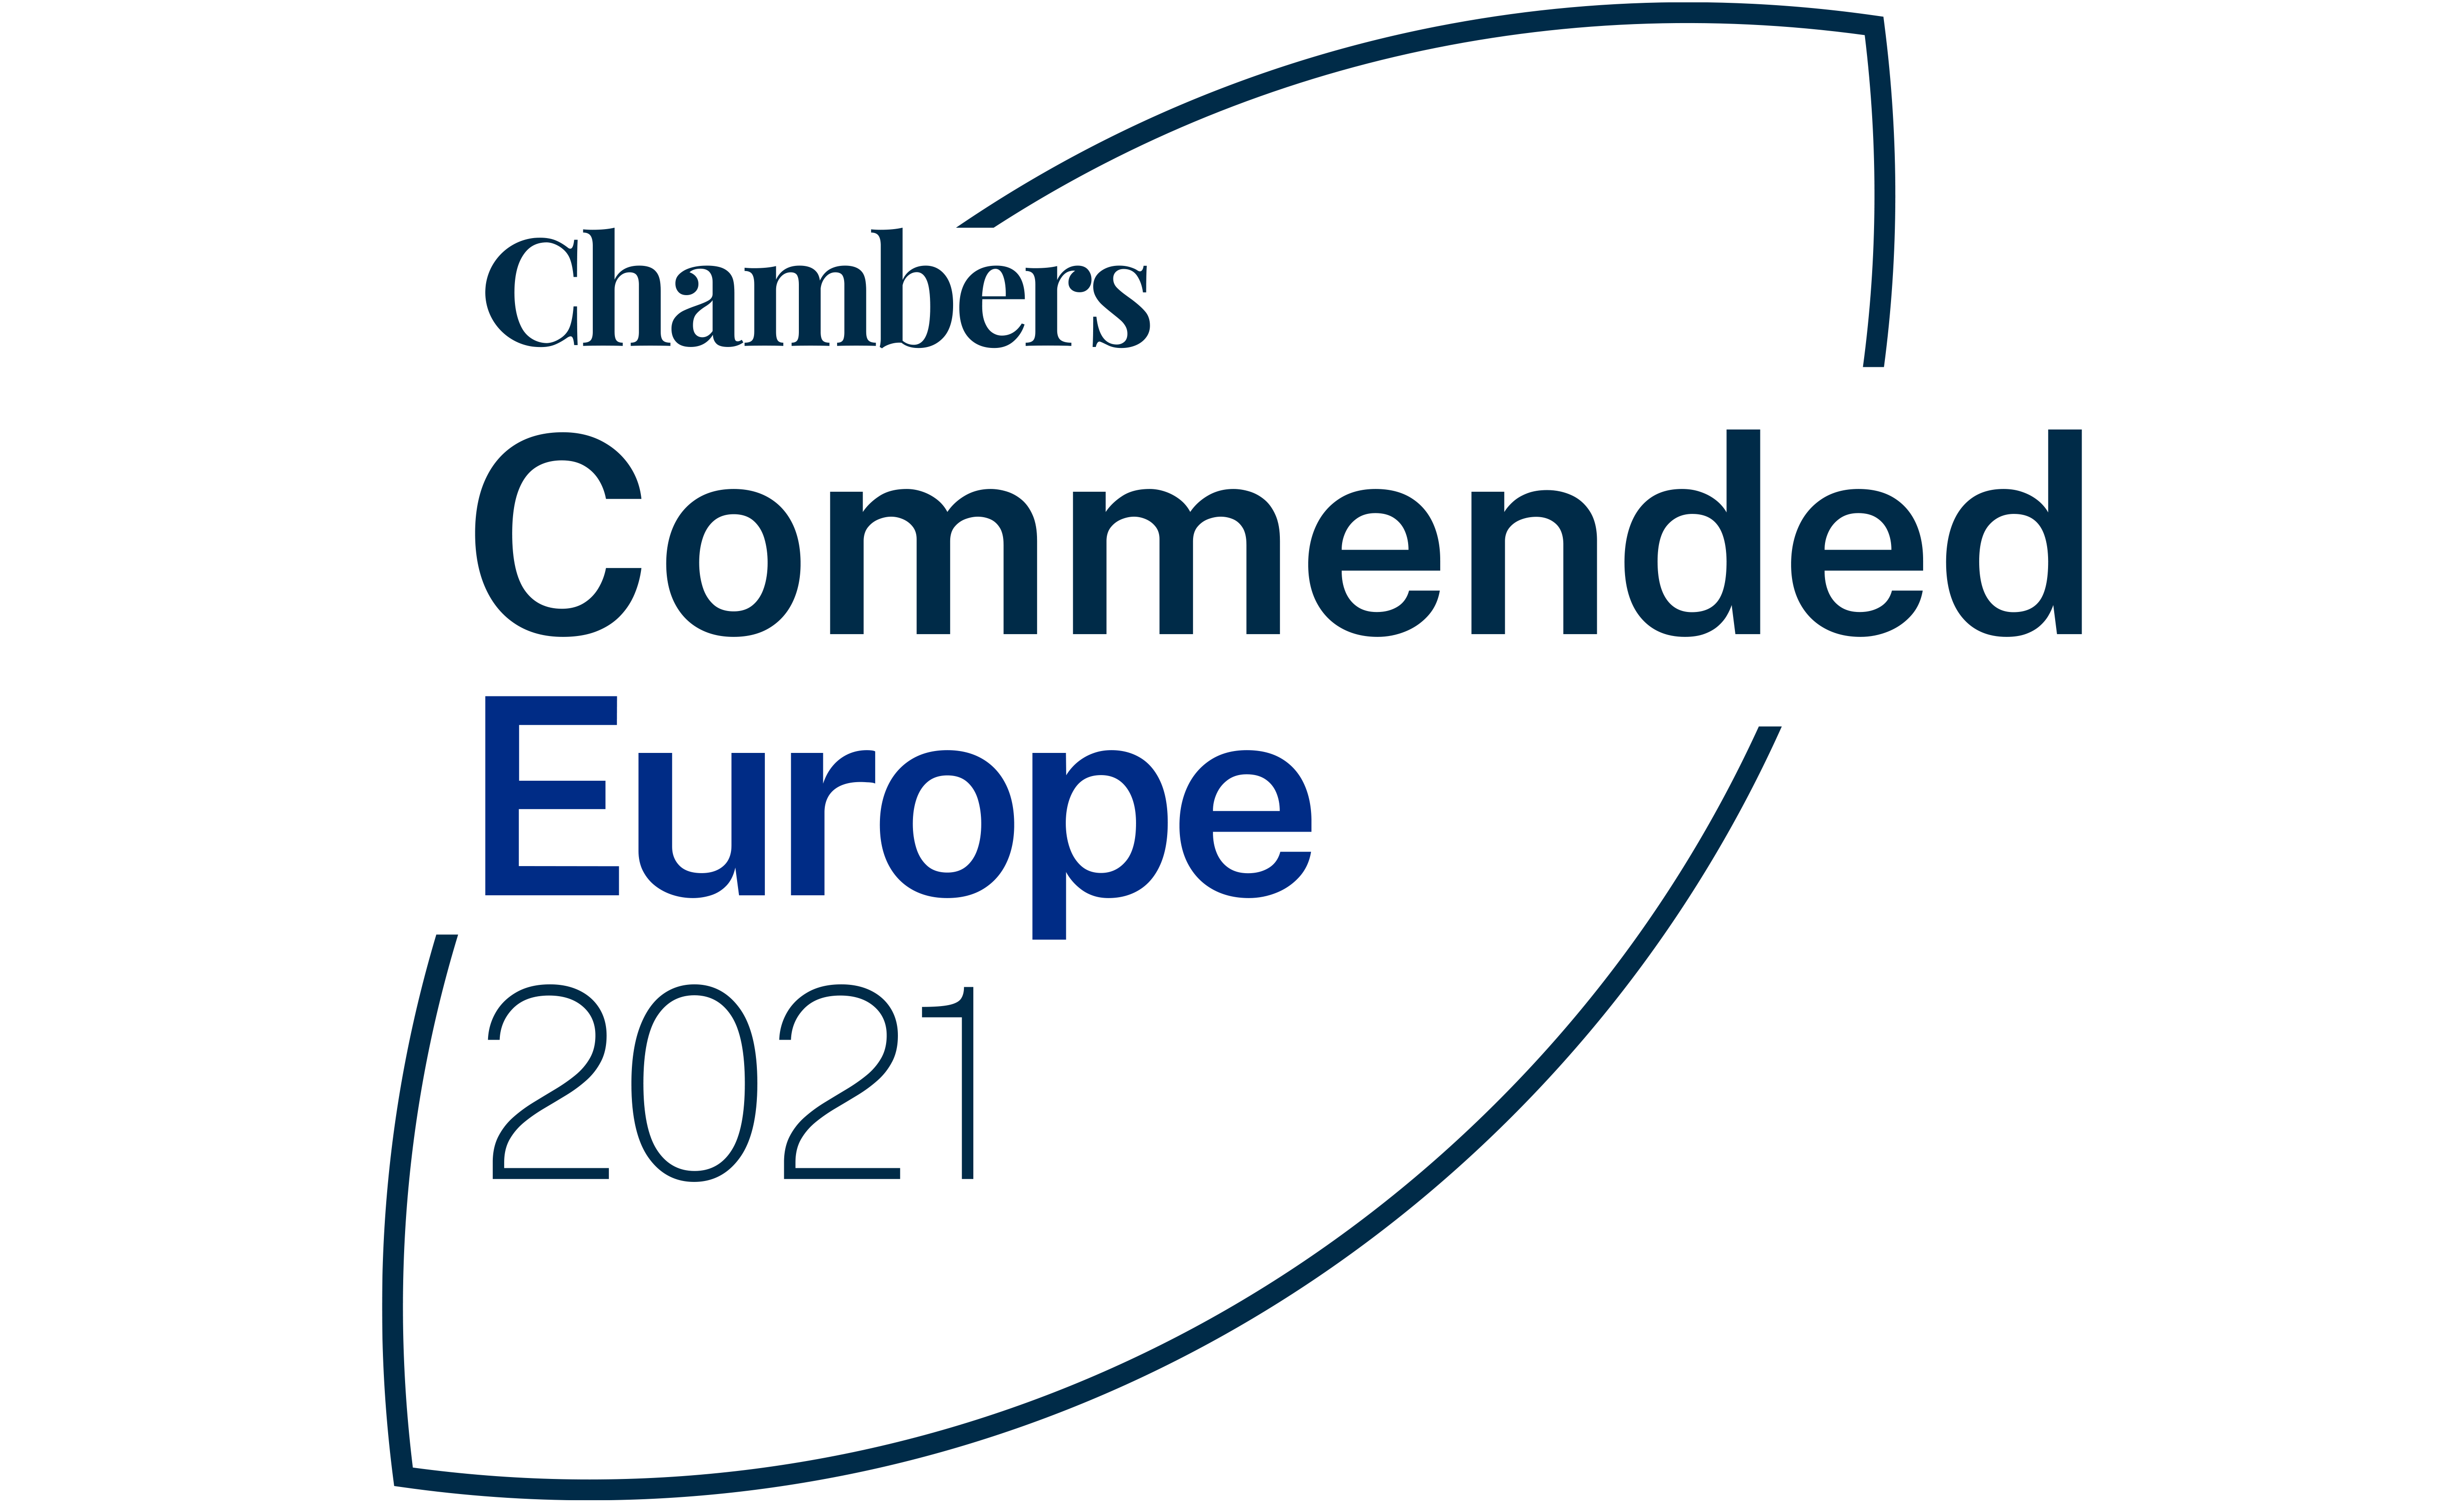 Chambers Europe Awards 2021 Commended 5225X3188